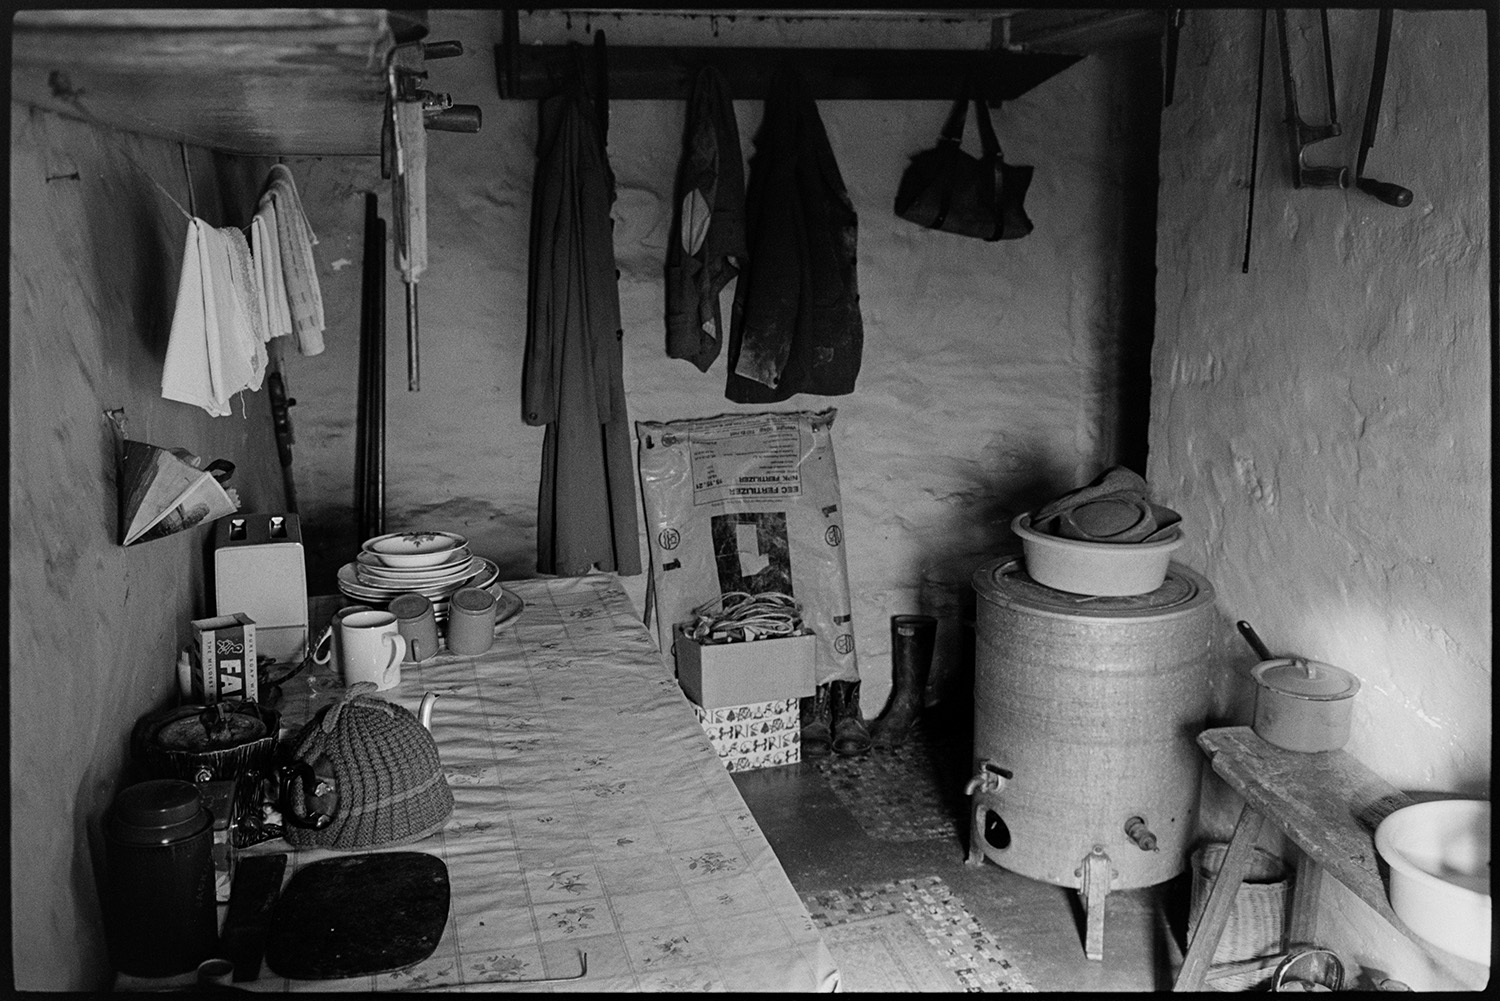 Interior of kitchen, gas boiler, utensils etc. 
[The interior of the kitchen at Bottreaux Mill, Molland with a gas boiler and table. A teapot, plates, toaster and mugs can be seen on the table. Towels are also hung up to dry.]